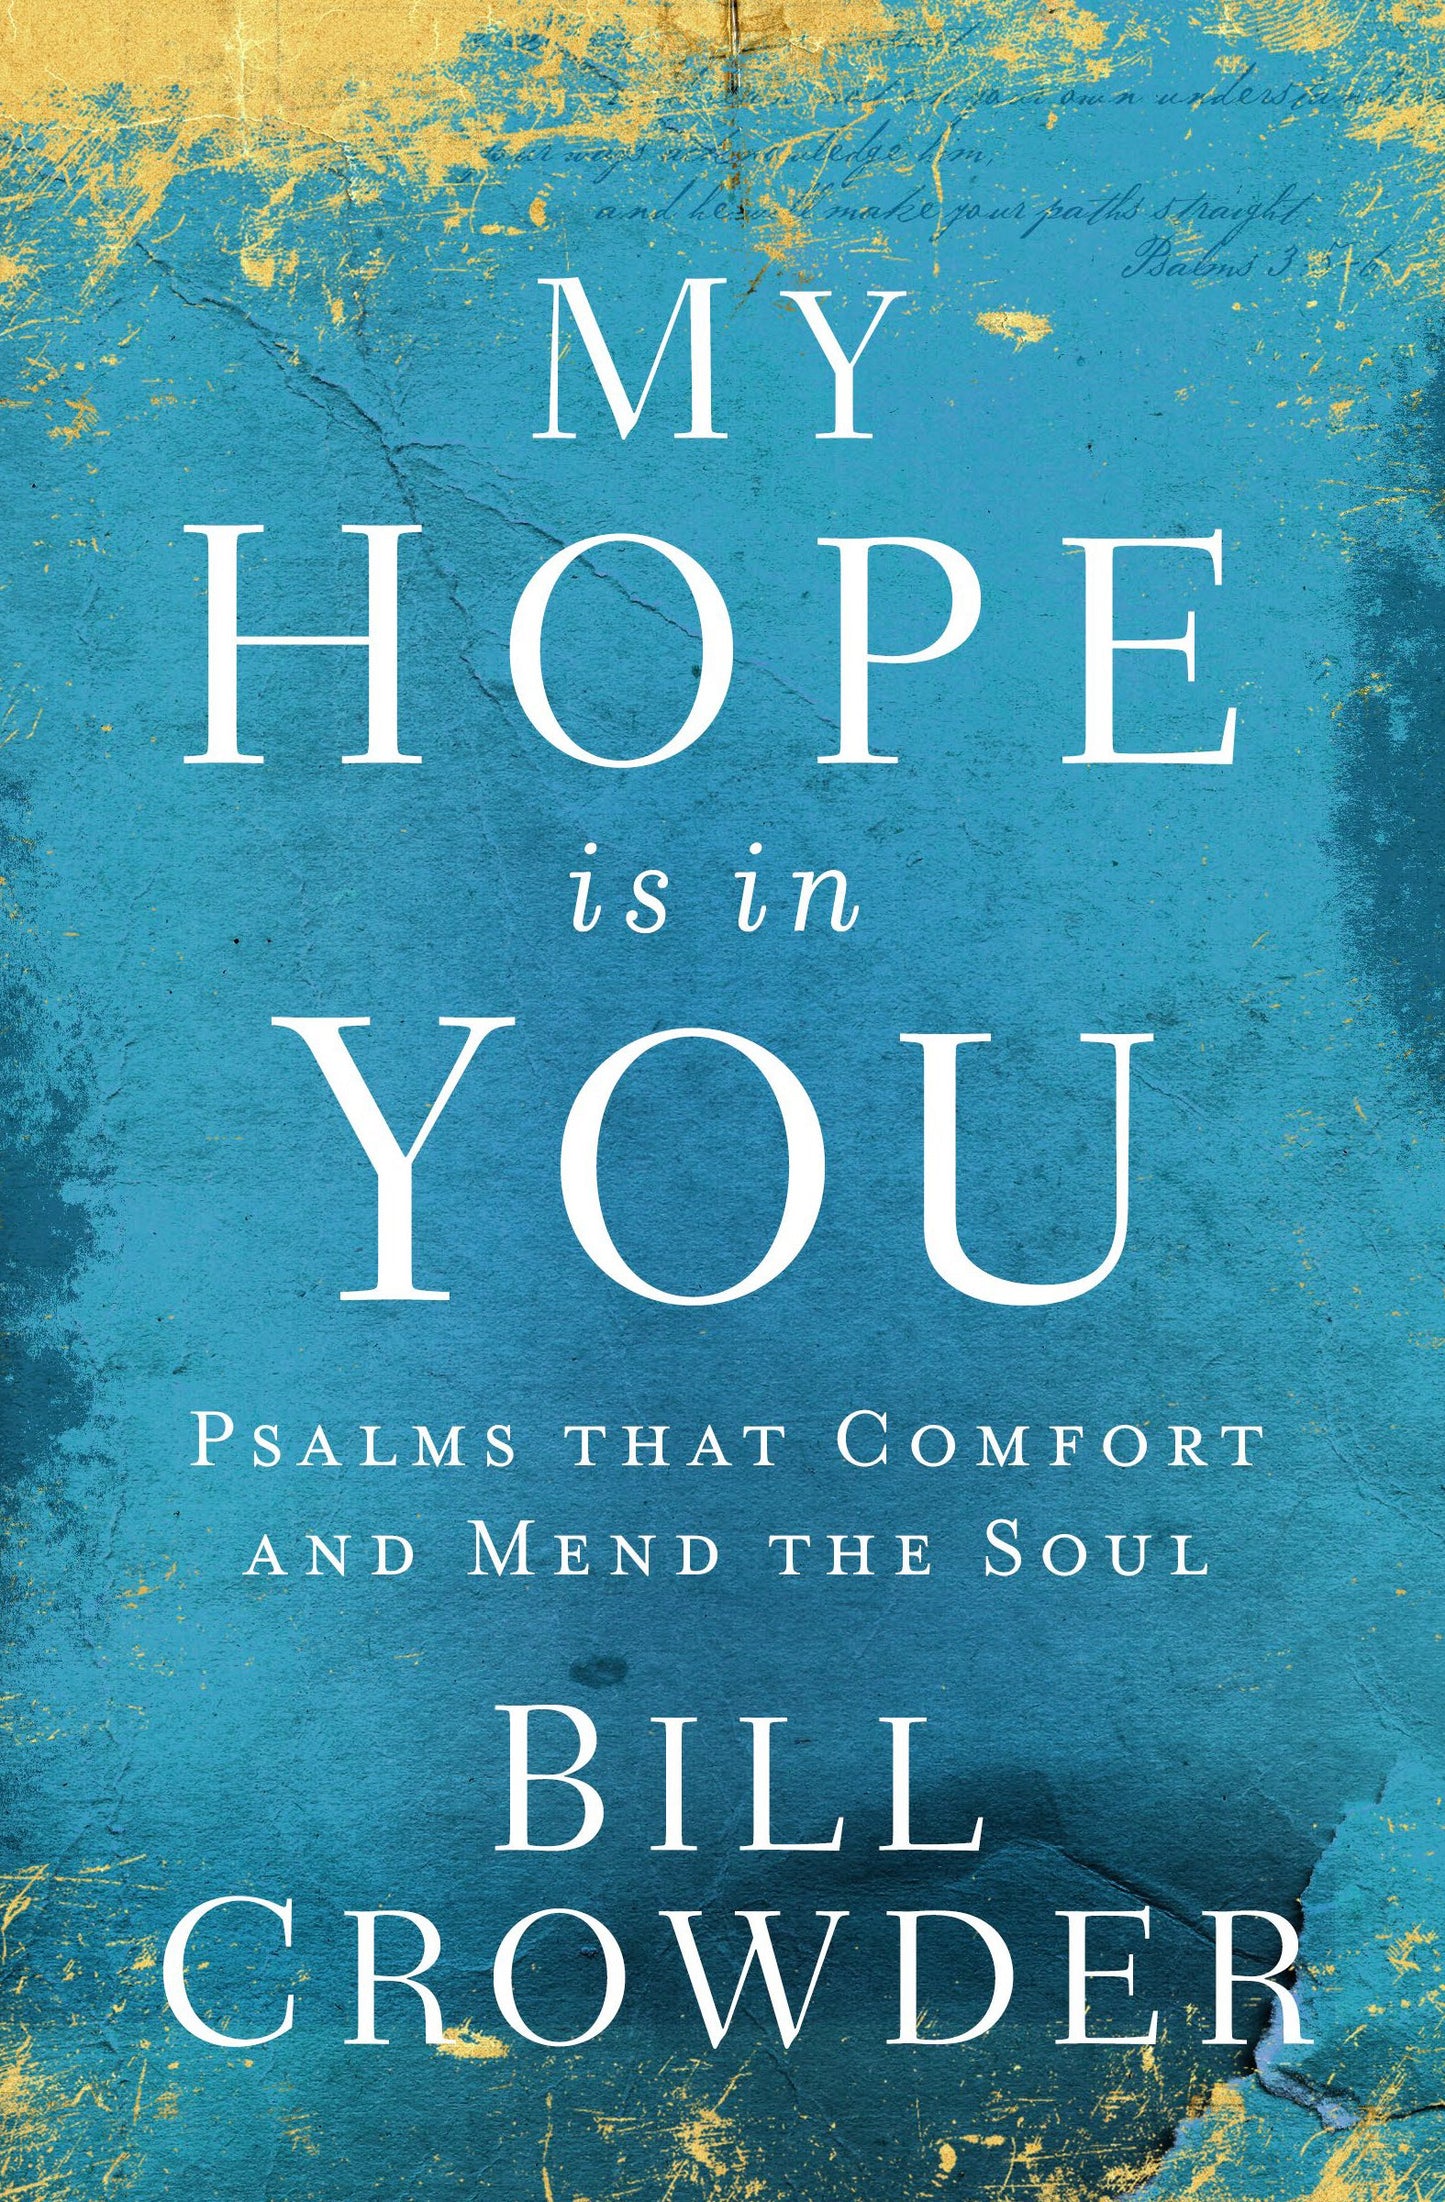 My Hope Is in You: Psalms that Comfort and Mend the Soul Paperback